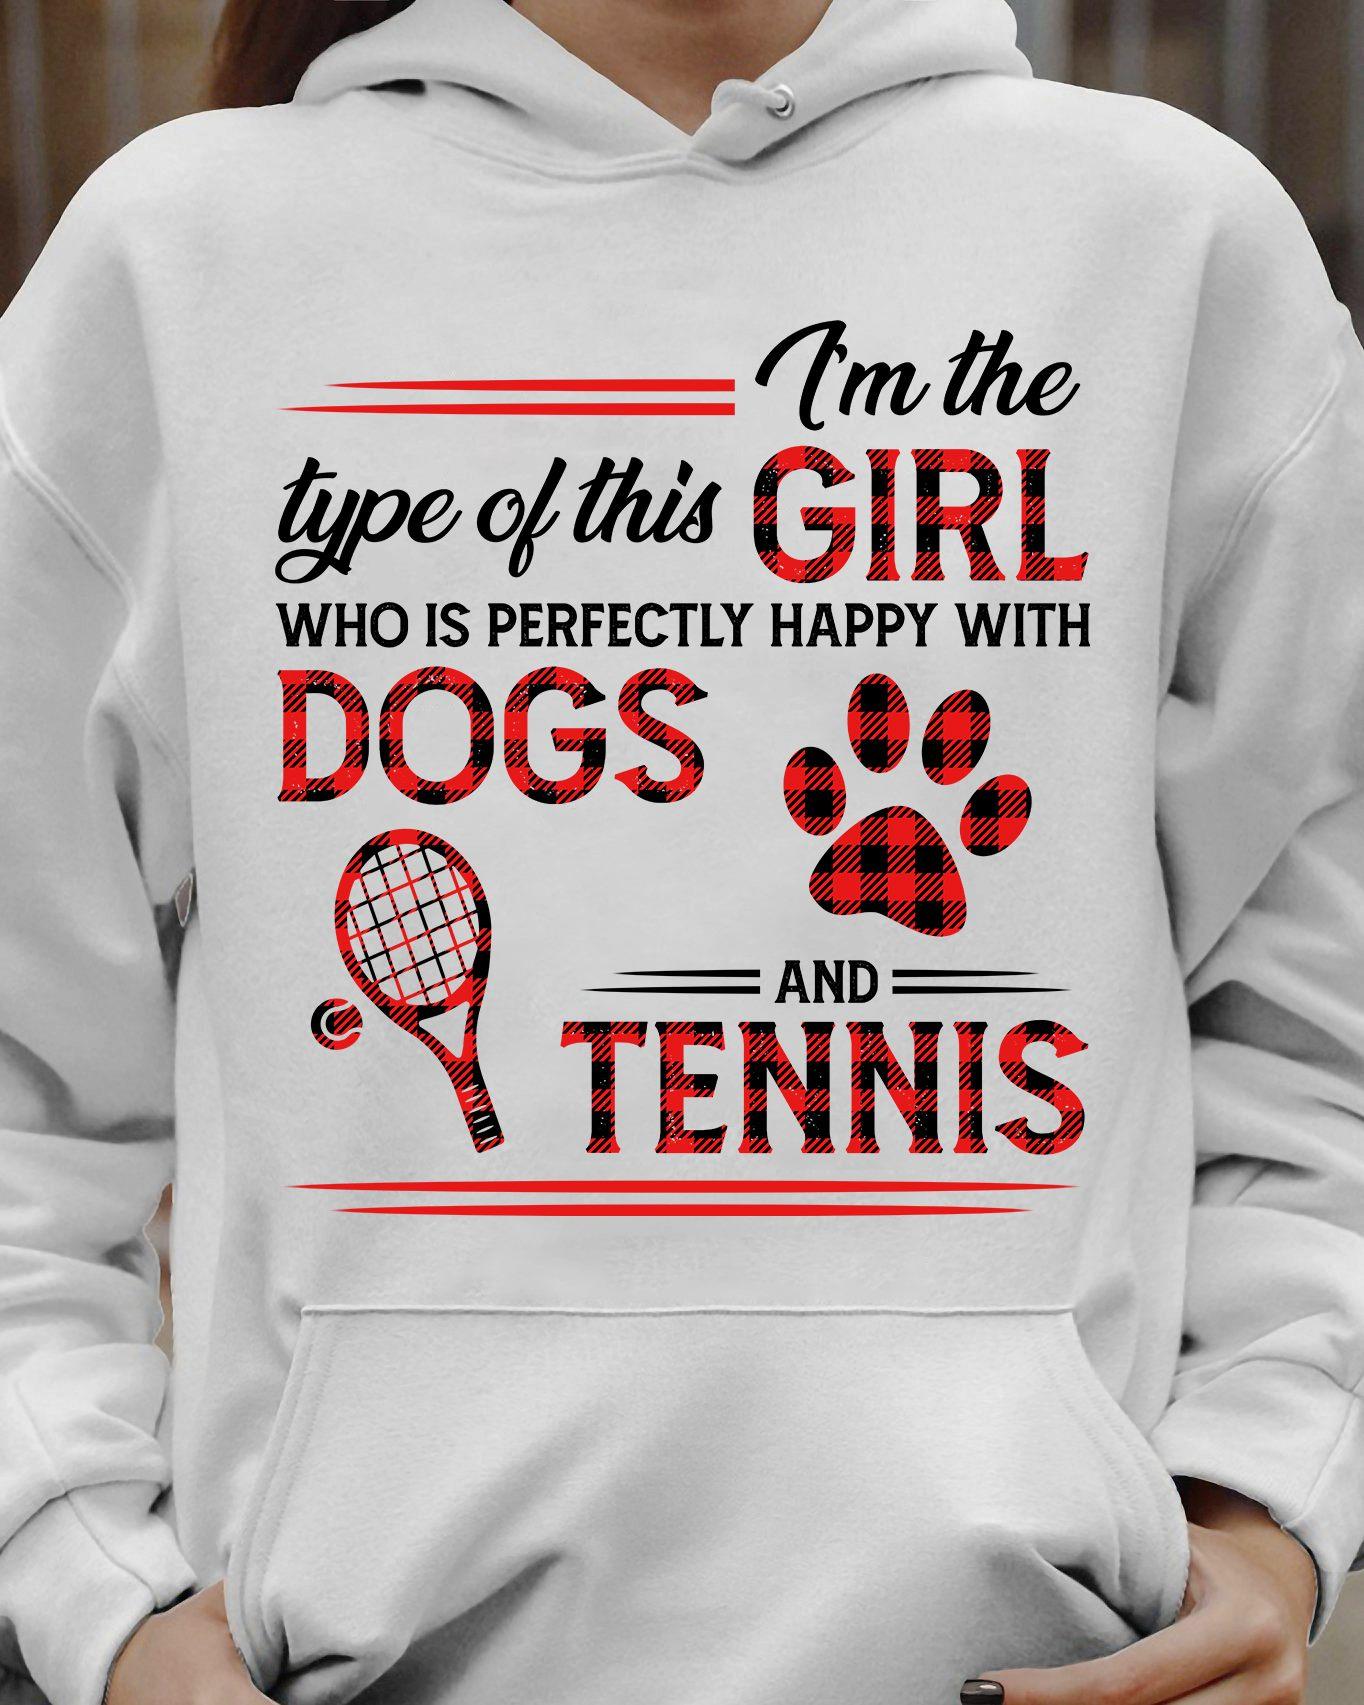 I'm the type of this girl who is perfectly happy with dogs and tennis - Tennis player gift, dog kinda girl